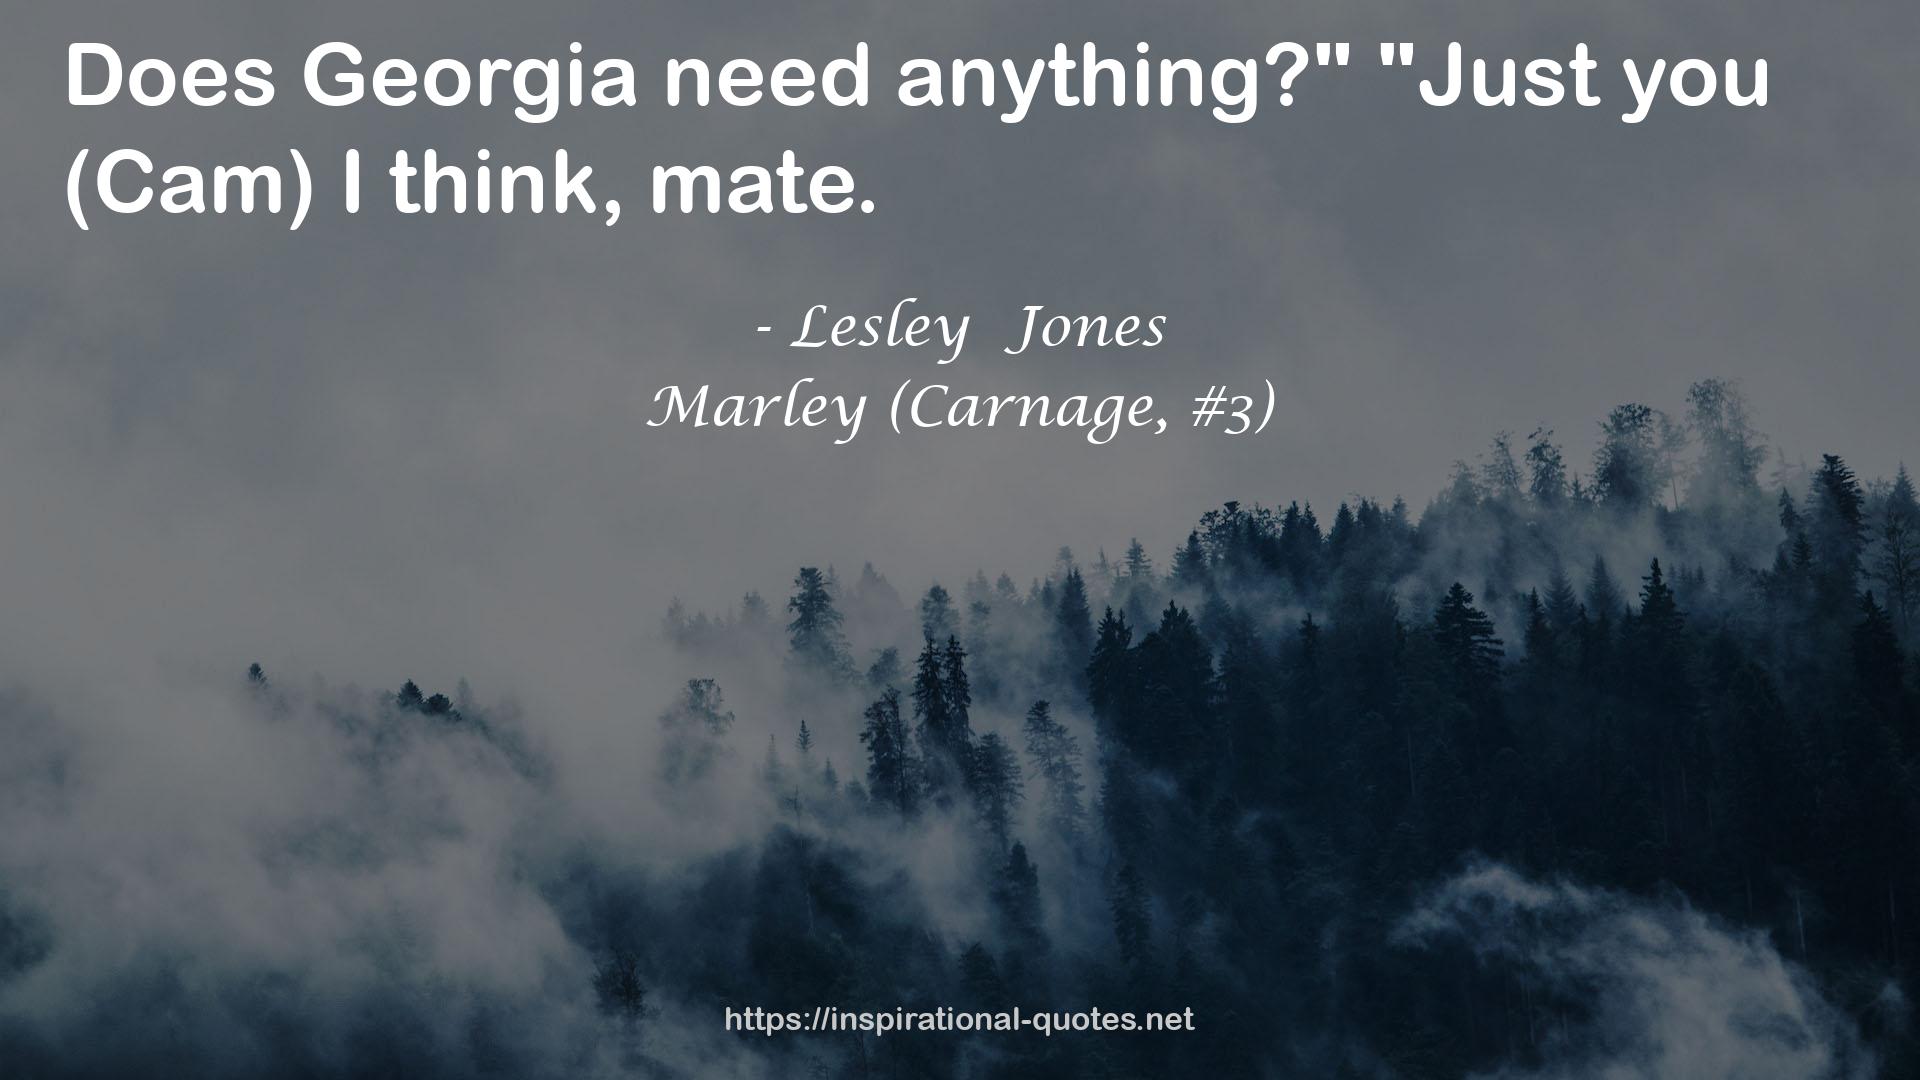 Marley (Carnage, #3) QUOTES